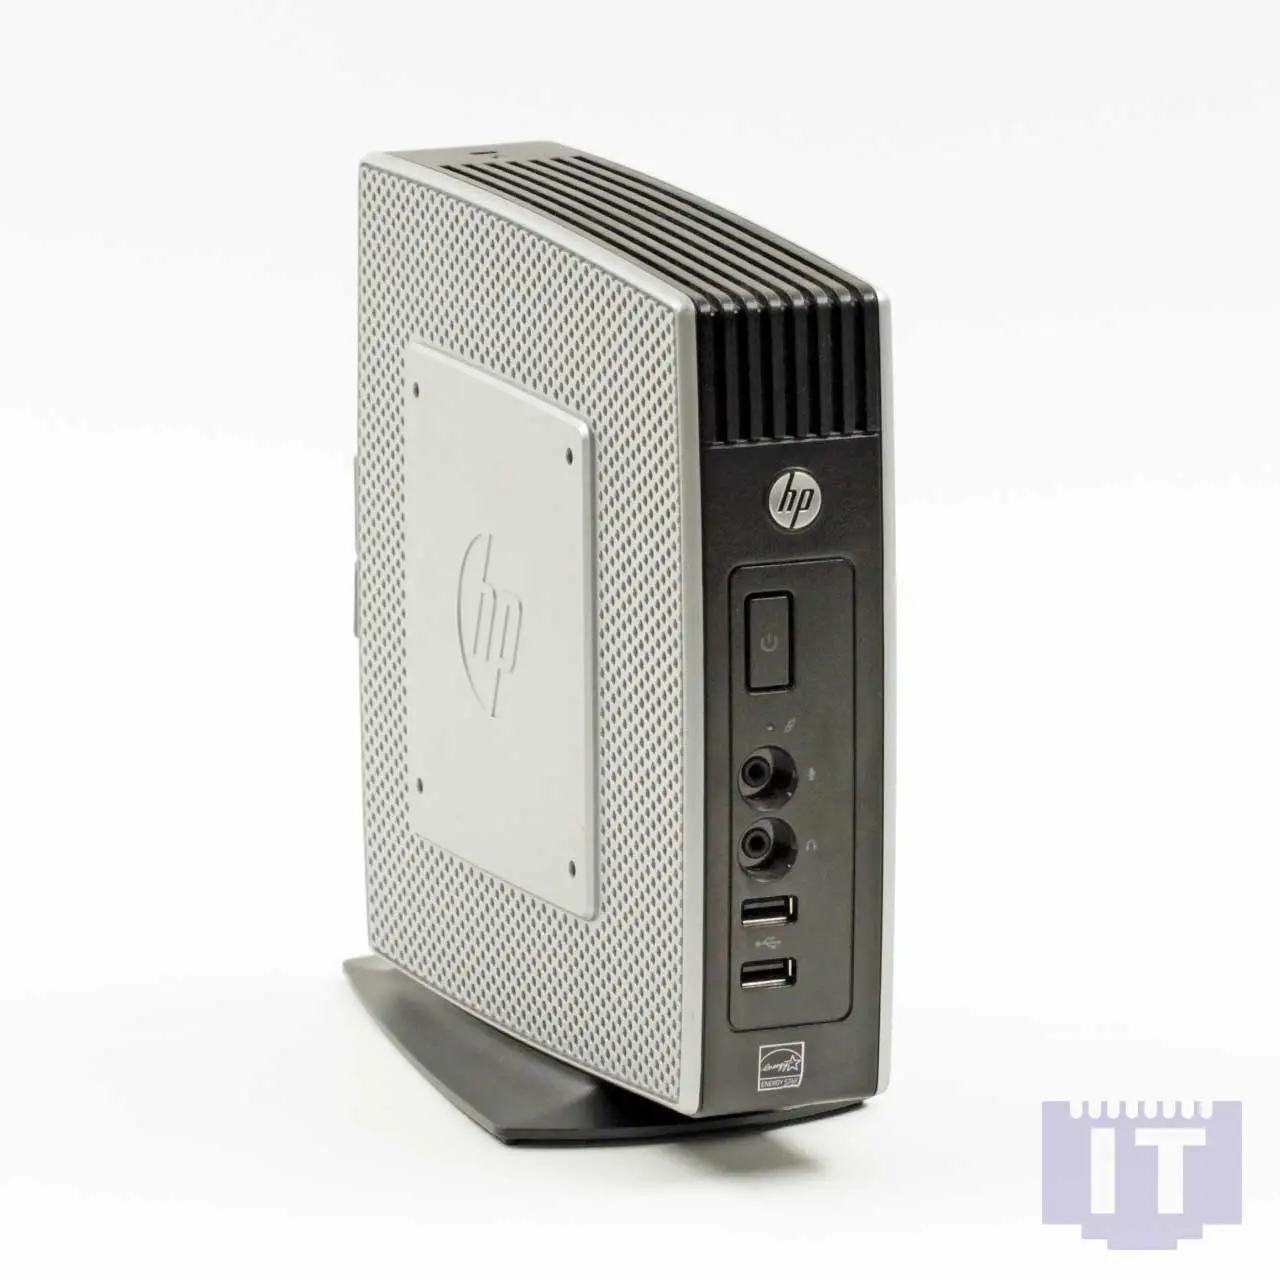 hewlett packard thin client t510 - How much power does the HP t510 use